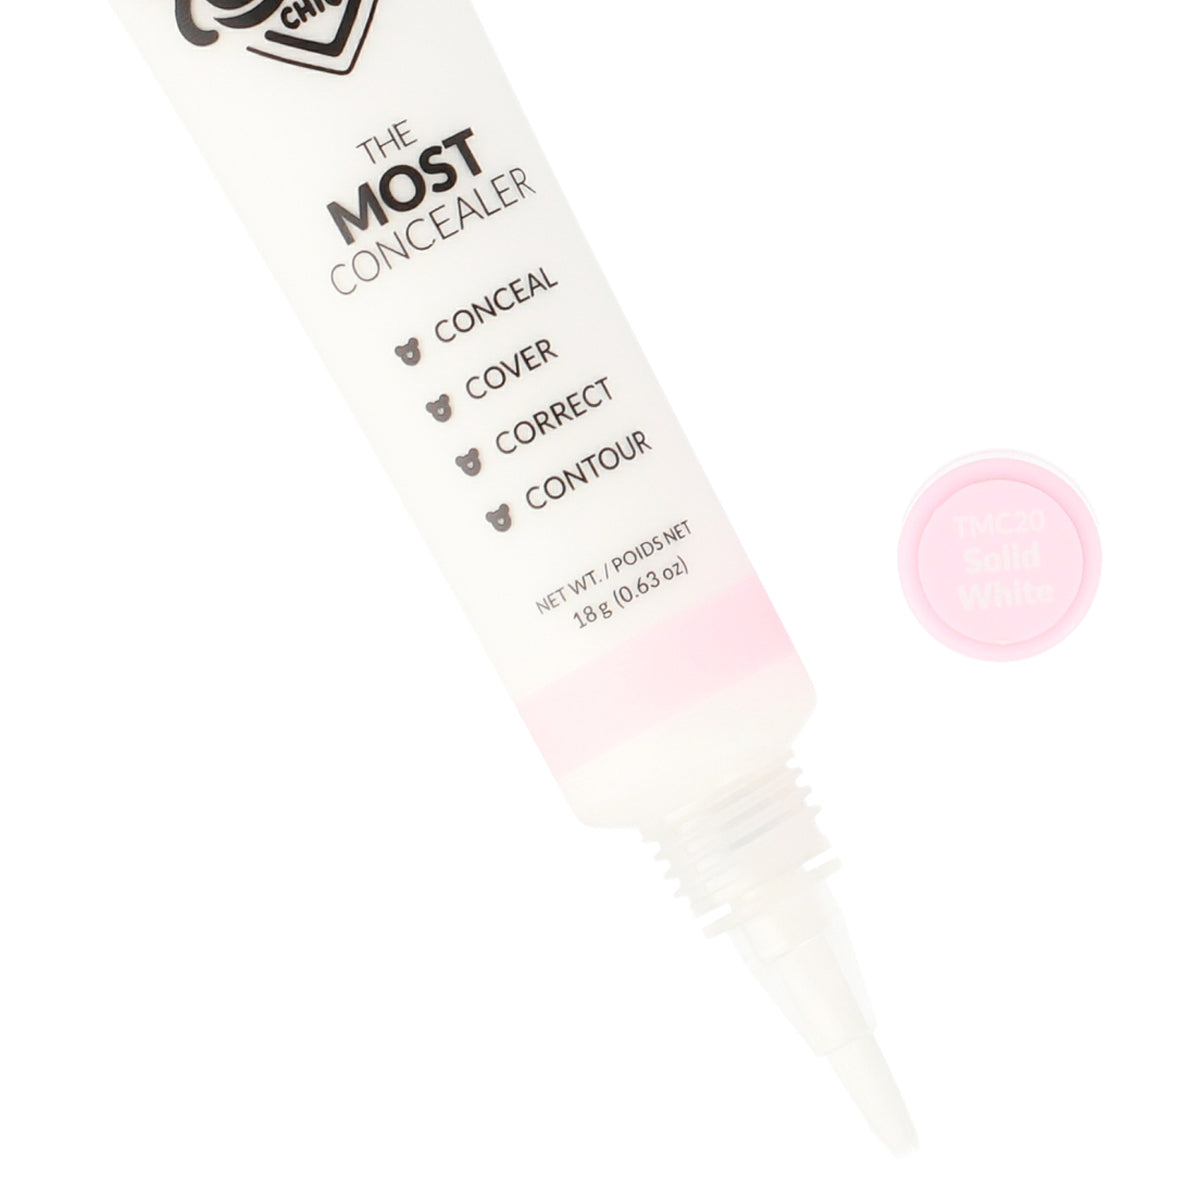 The Most Concealer 20 Solid White